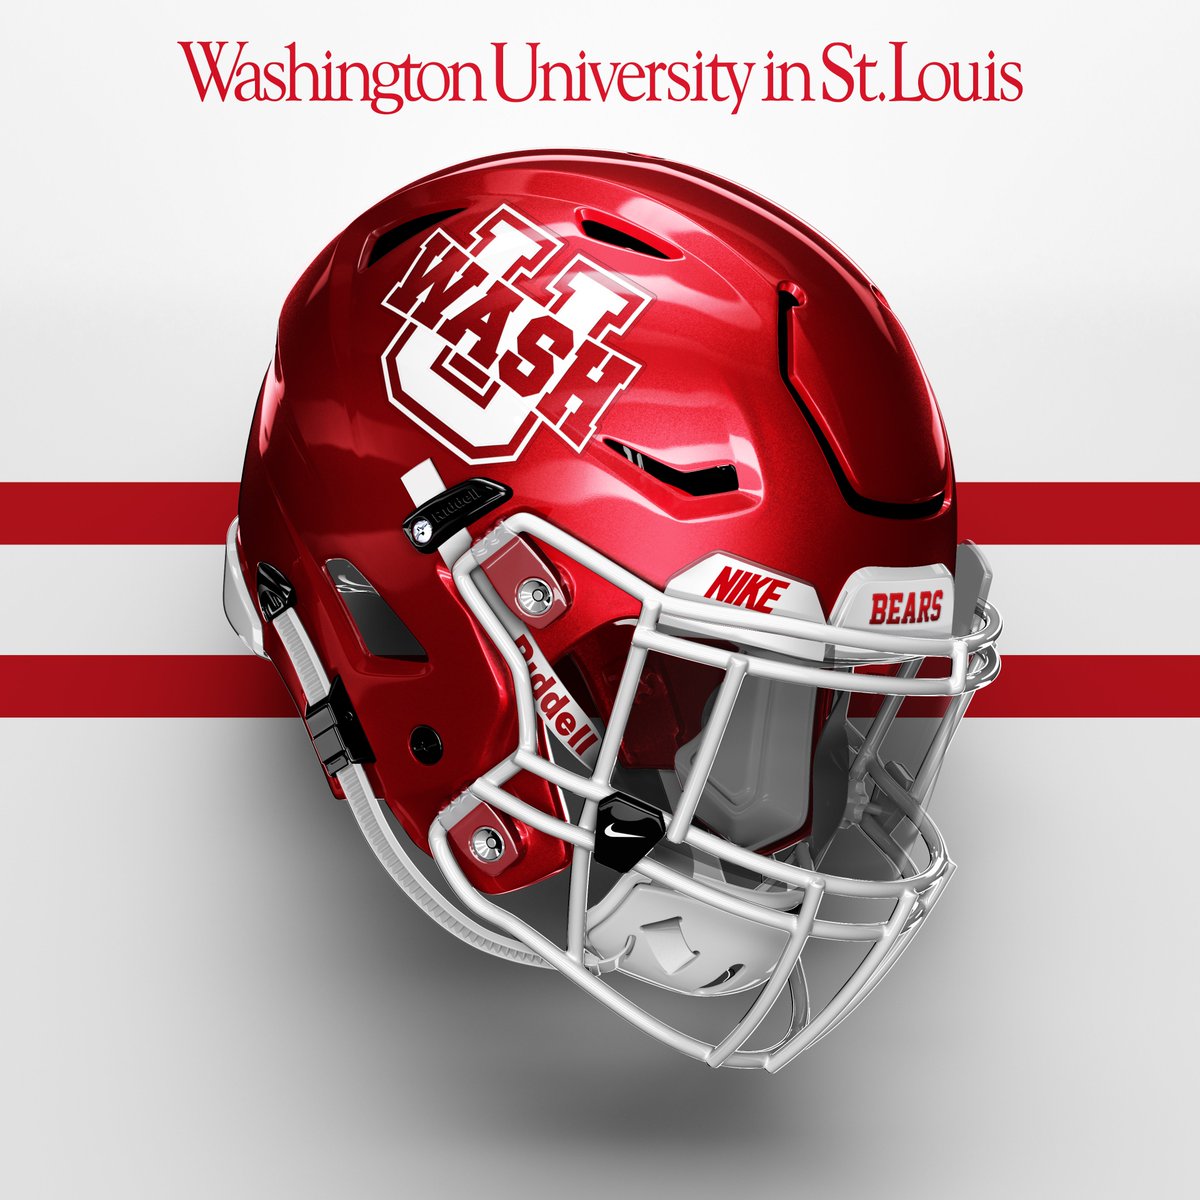 Great looking helmet for the Washington University Bears!

Another solid season for WashU who finished 7-3 in one of the toughest conferences in Division 3 football 💪

#RuntotheBattle